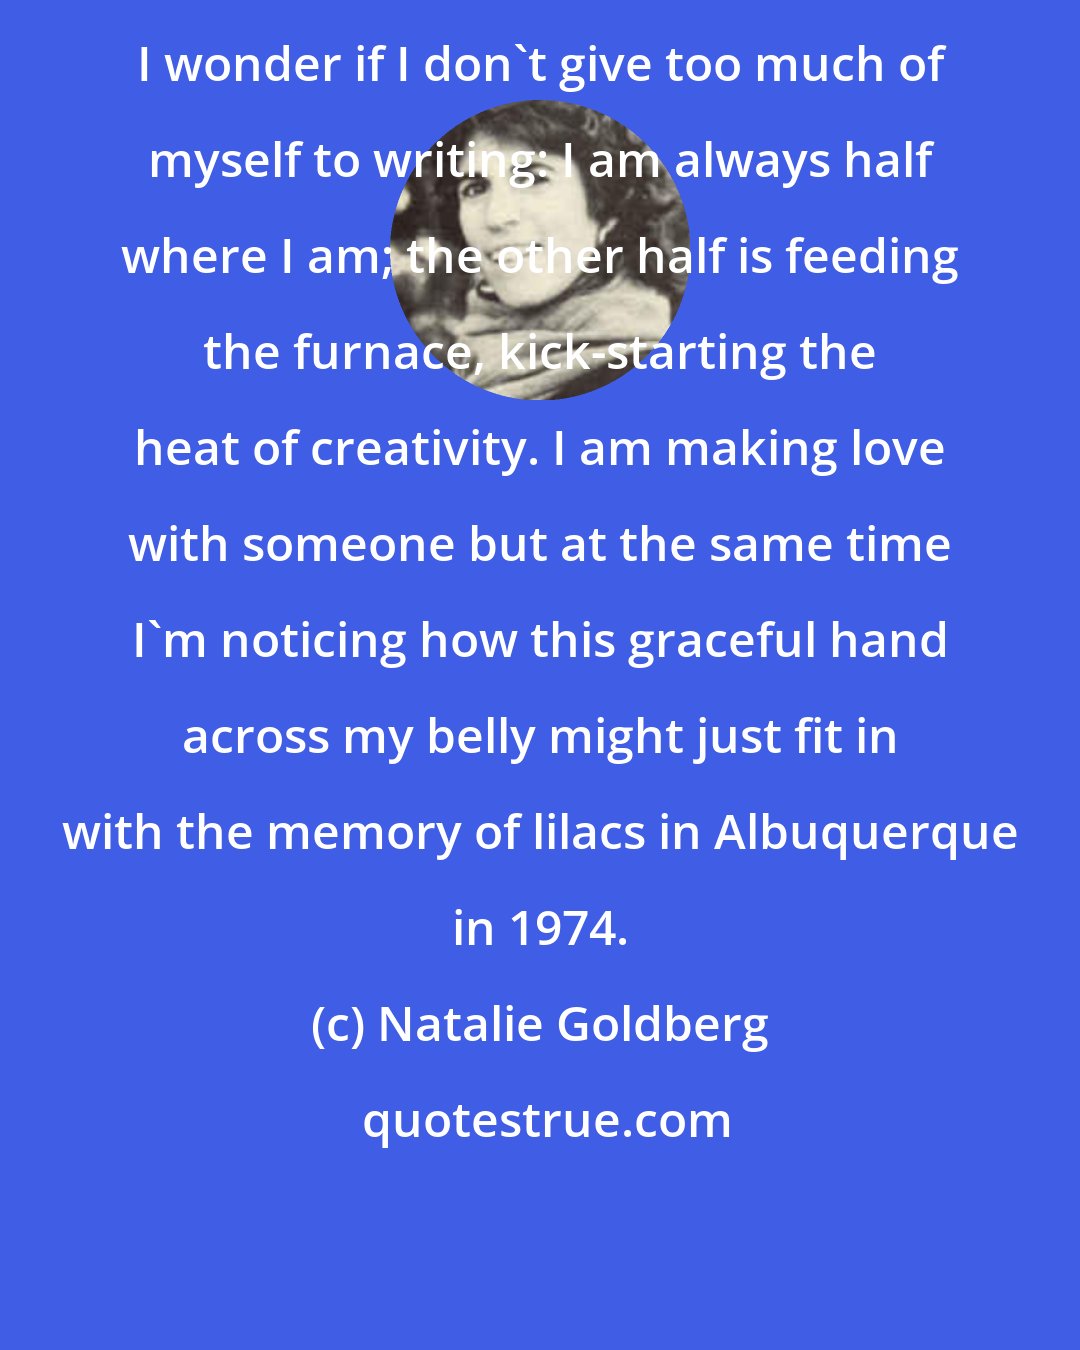 Natalie Goldberg: I wonder if I don't give too much of myself to writing: I am always half where I am; the other half is feeding the furnace, kick-starting the heat of creativity. I am making love with someone but at the same time I'm noticing how this graceful hand across my belly might just fit in with the memory of lilacs in Albuquerque in 1974.